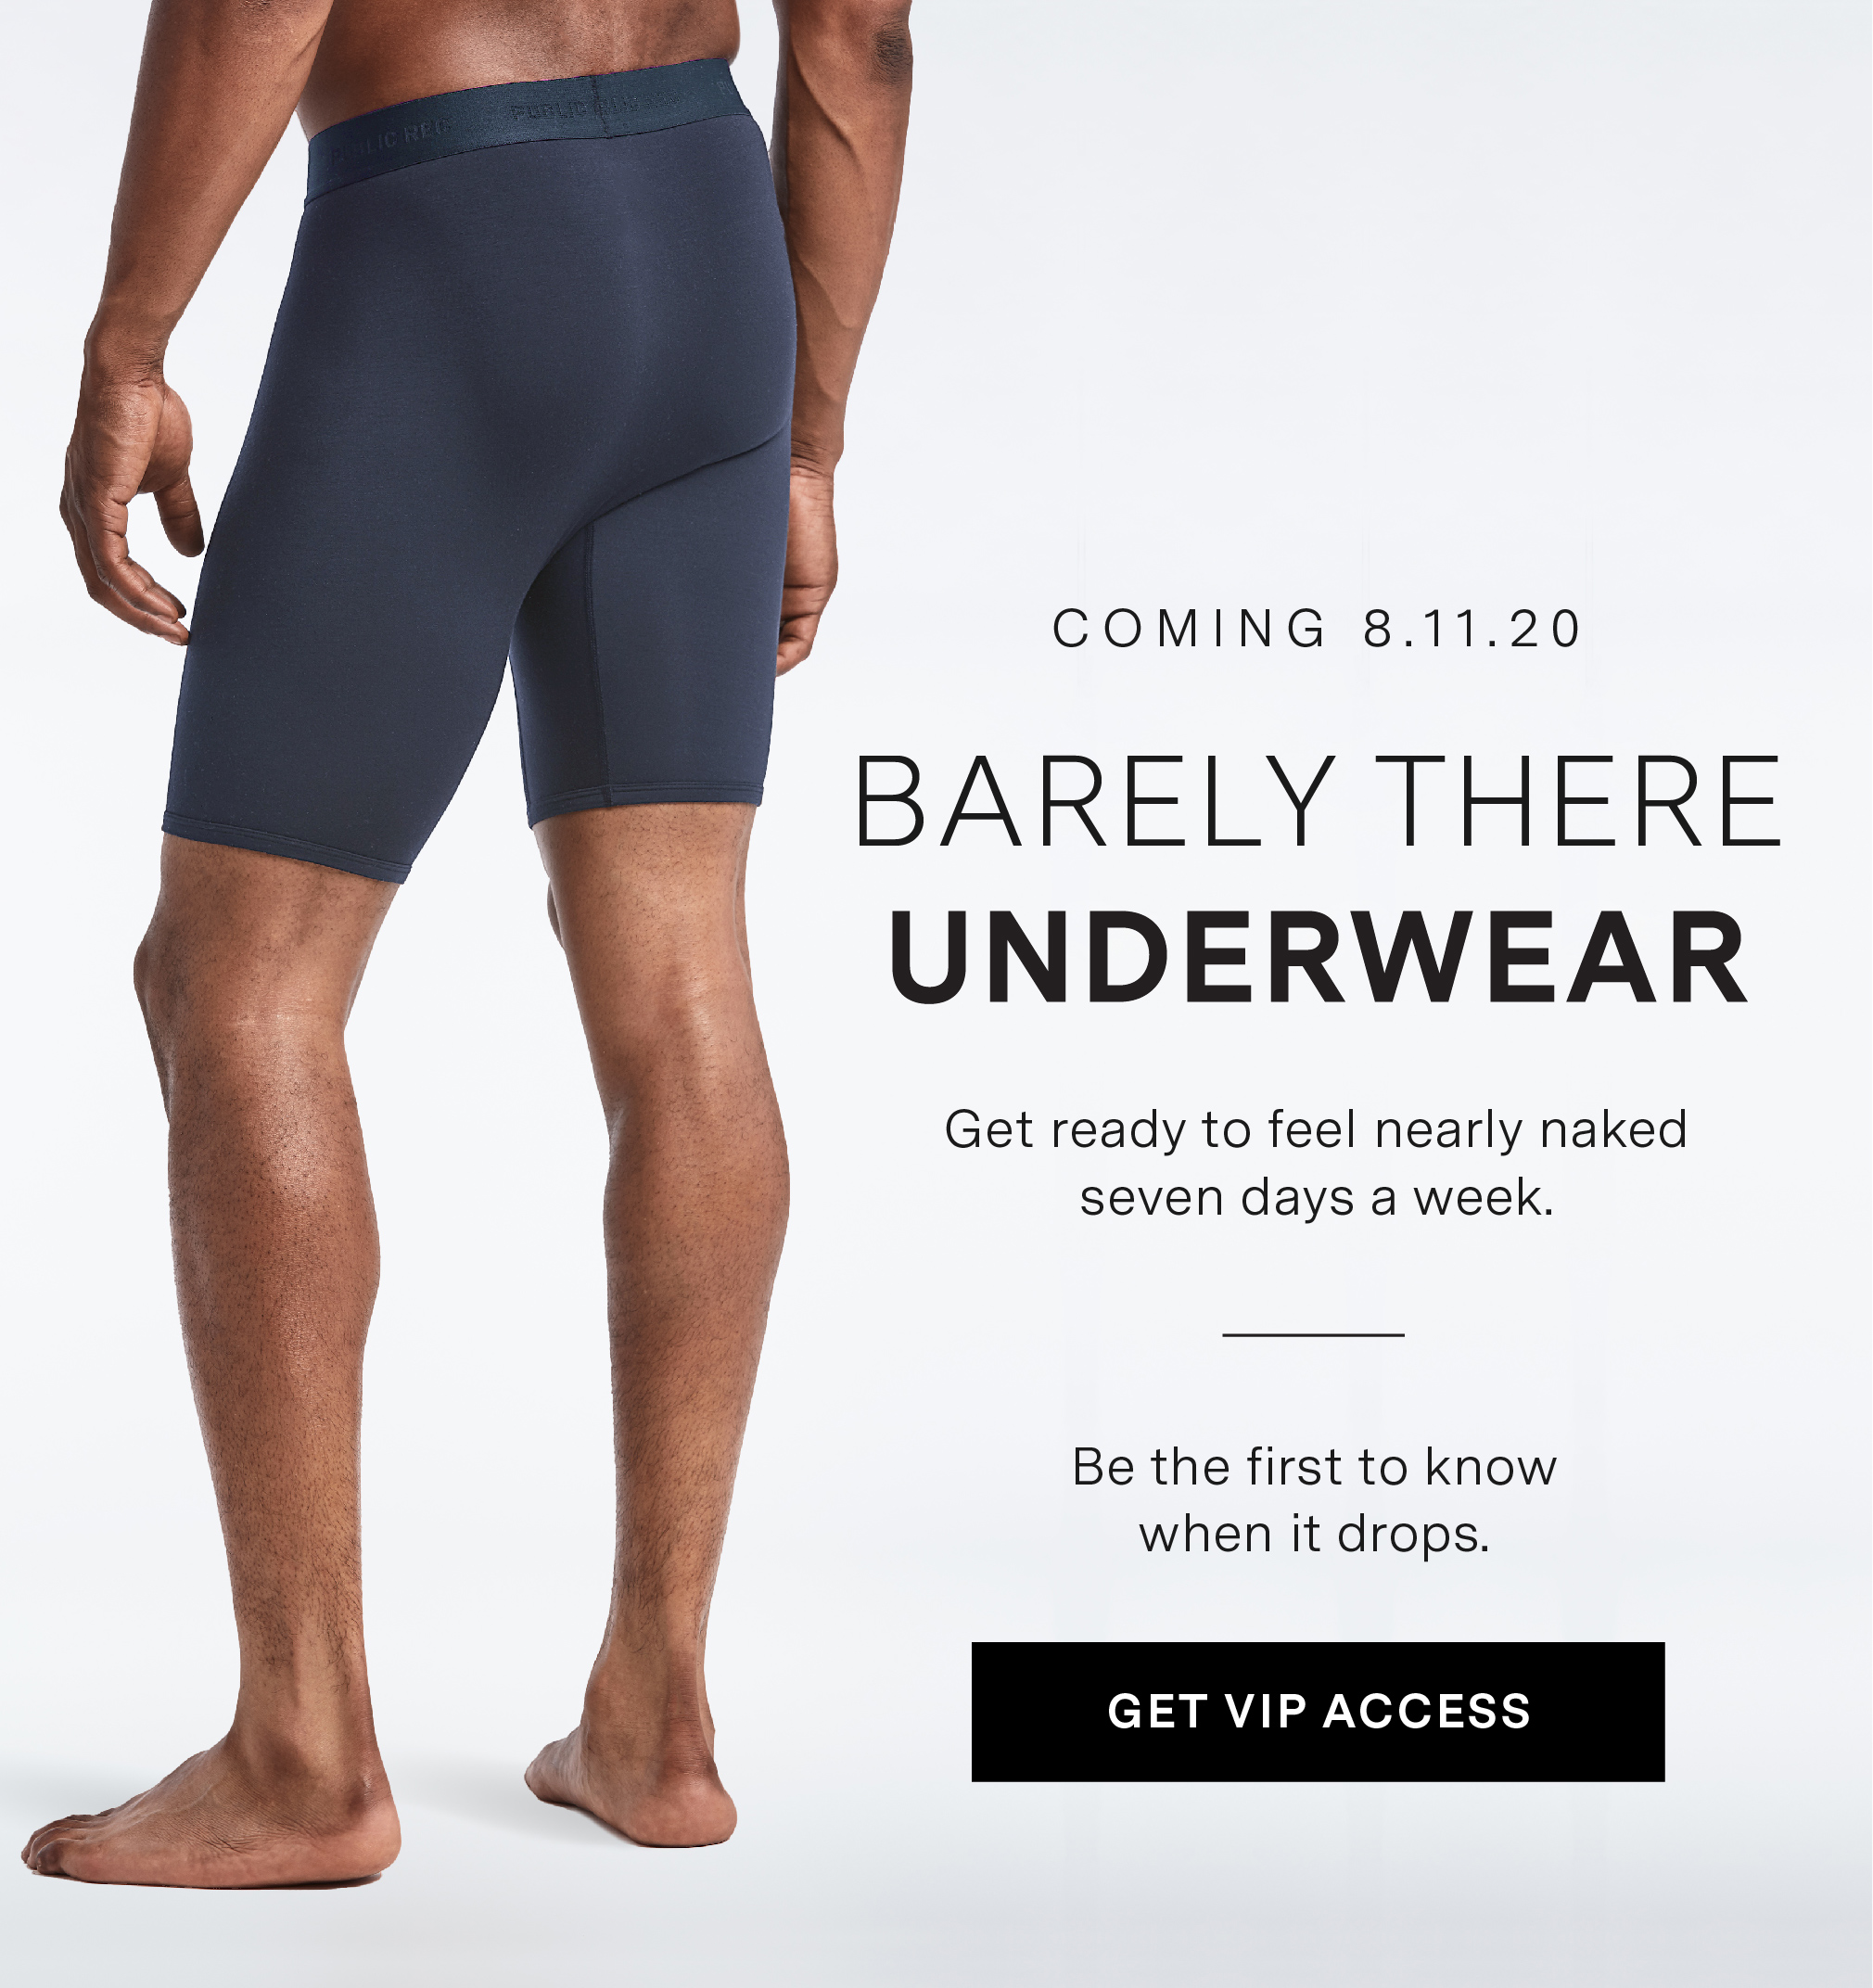 COMING 8.11.20 - BARELY THERE UNDERWEAR. Get ready to feel nearly naked seven days a week. Be the first to know when it drops >> GET VIP ACCESS.